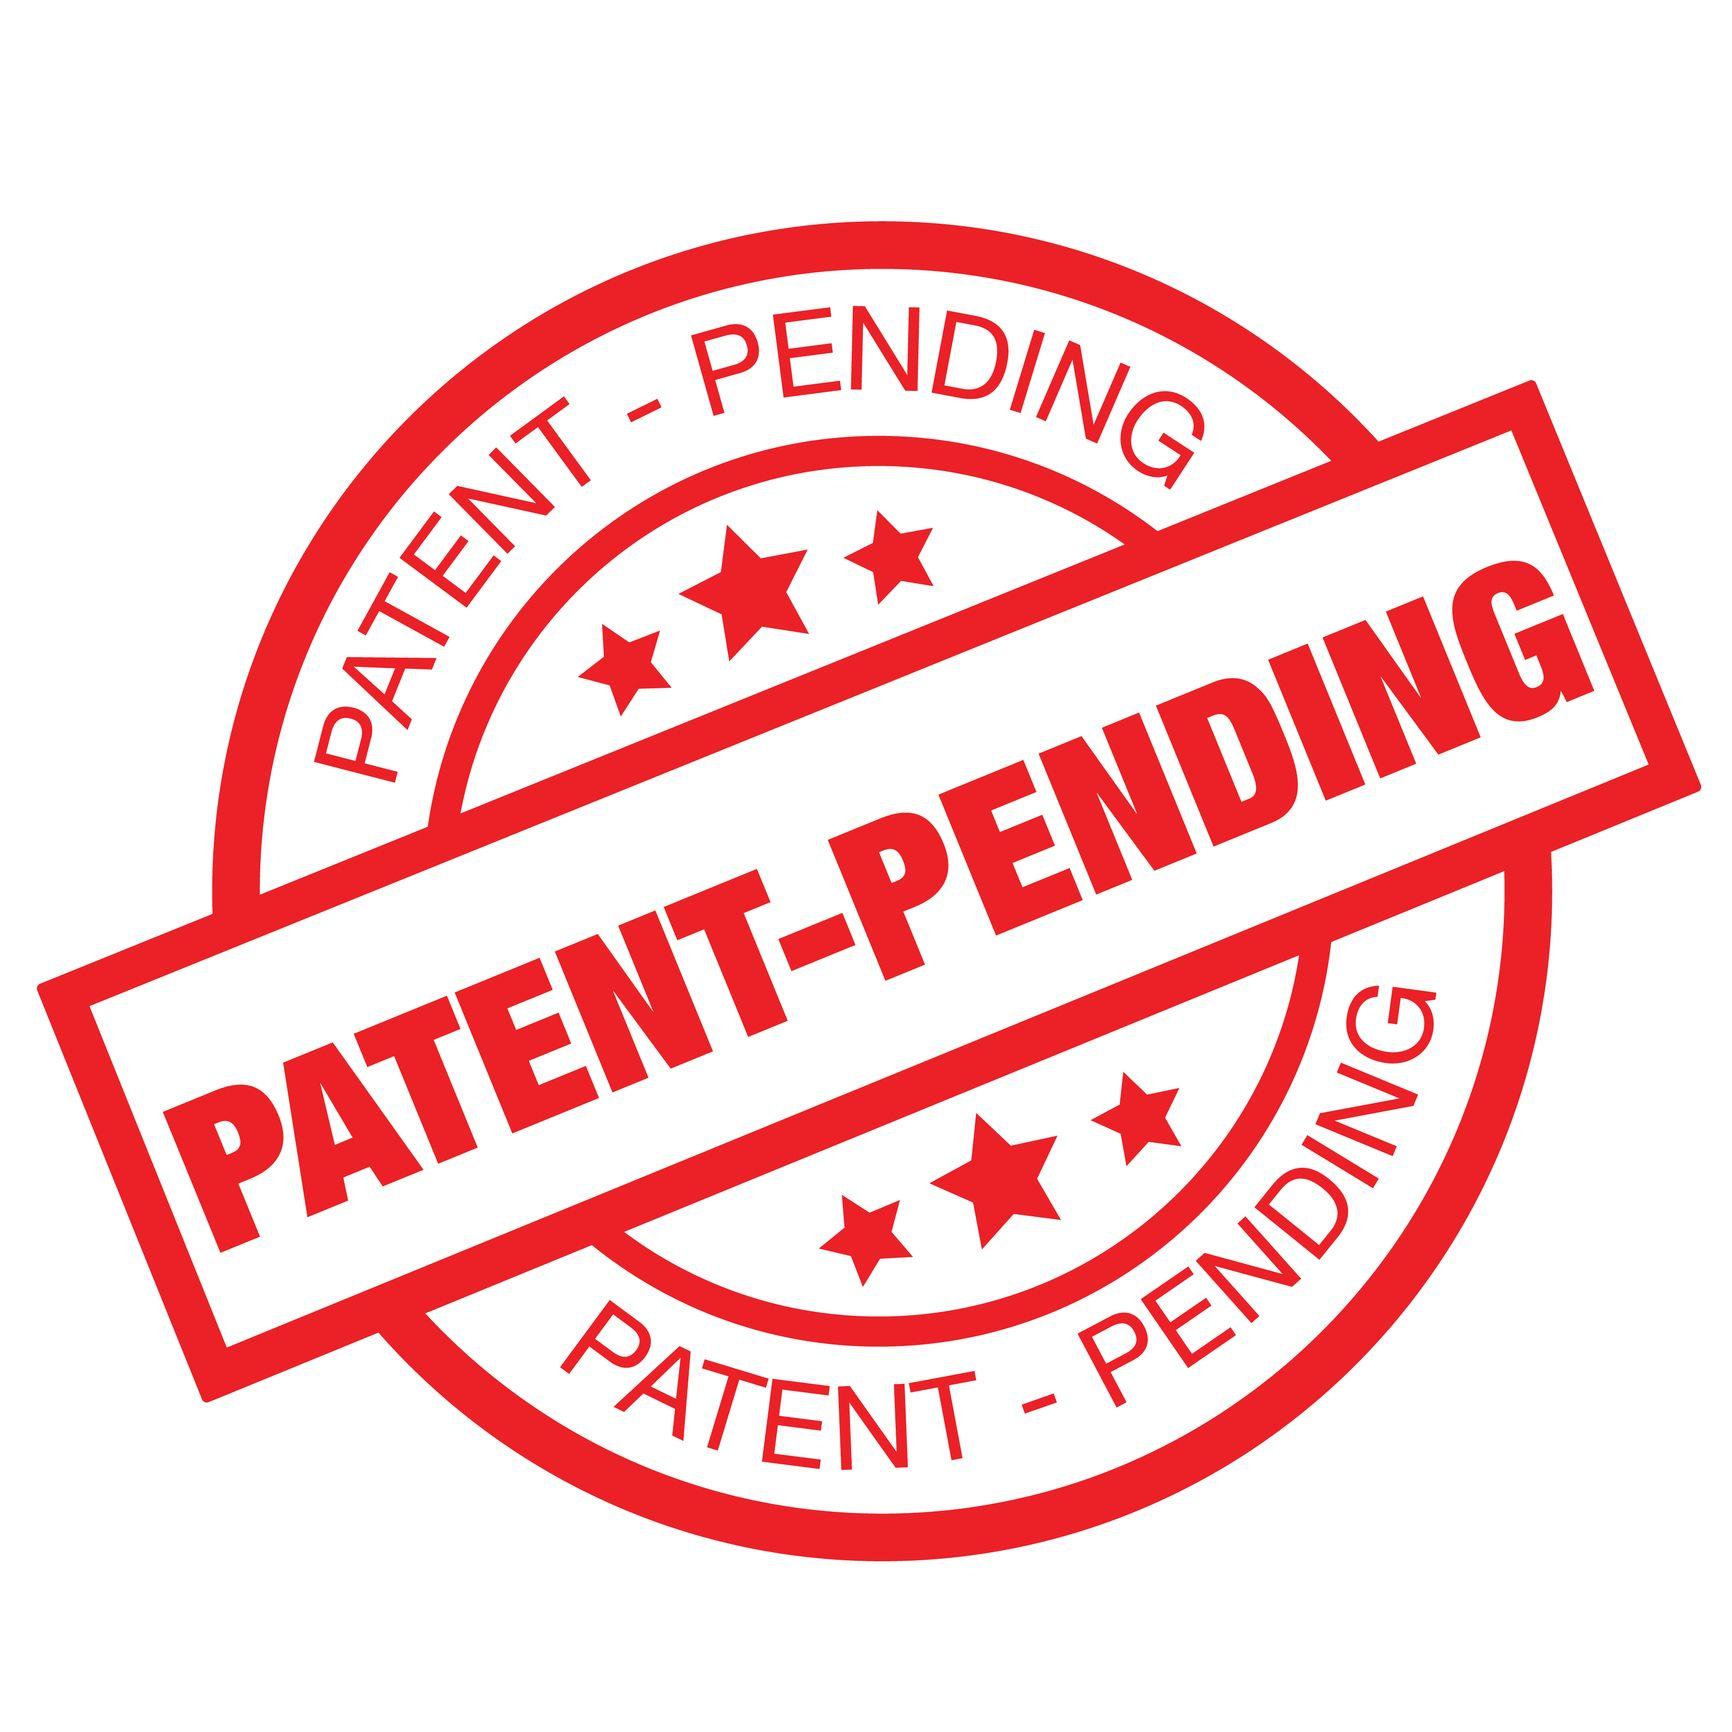 Patent Logo - Patent pending“ misleads consumers, according to German court ...